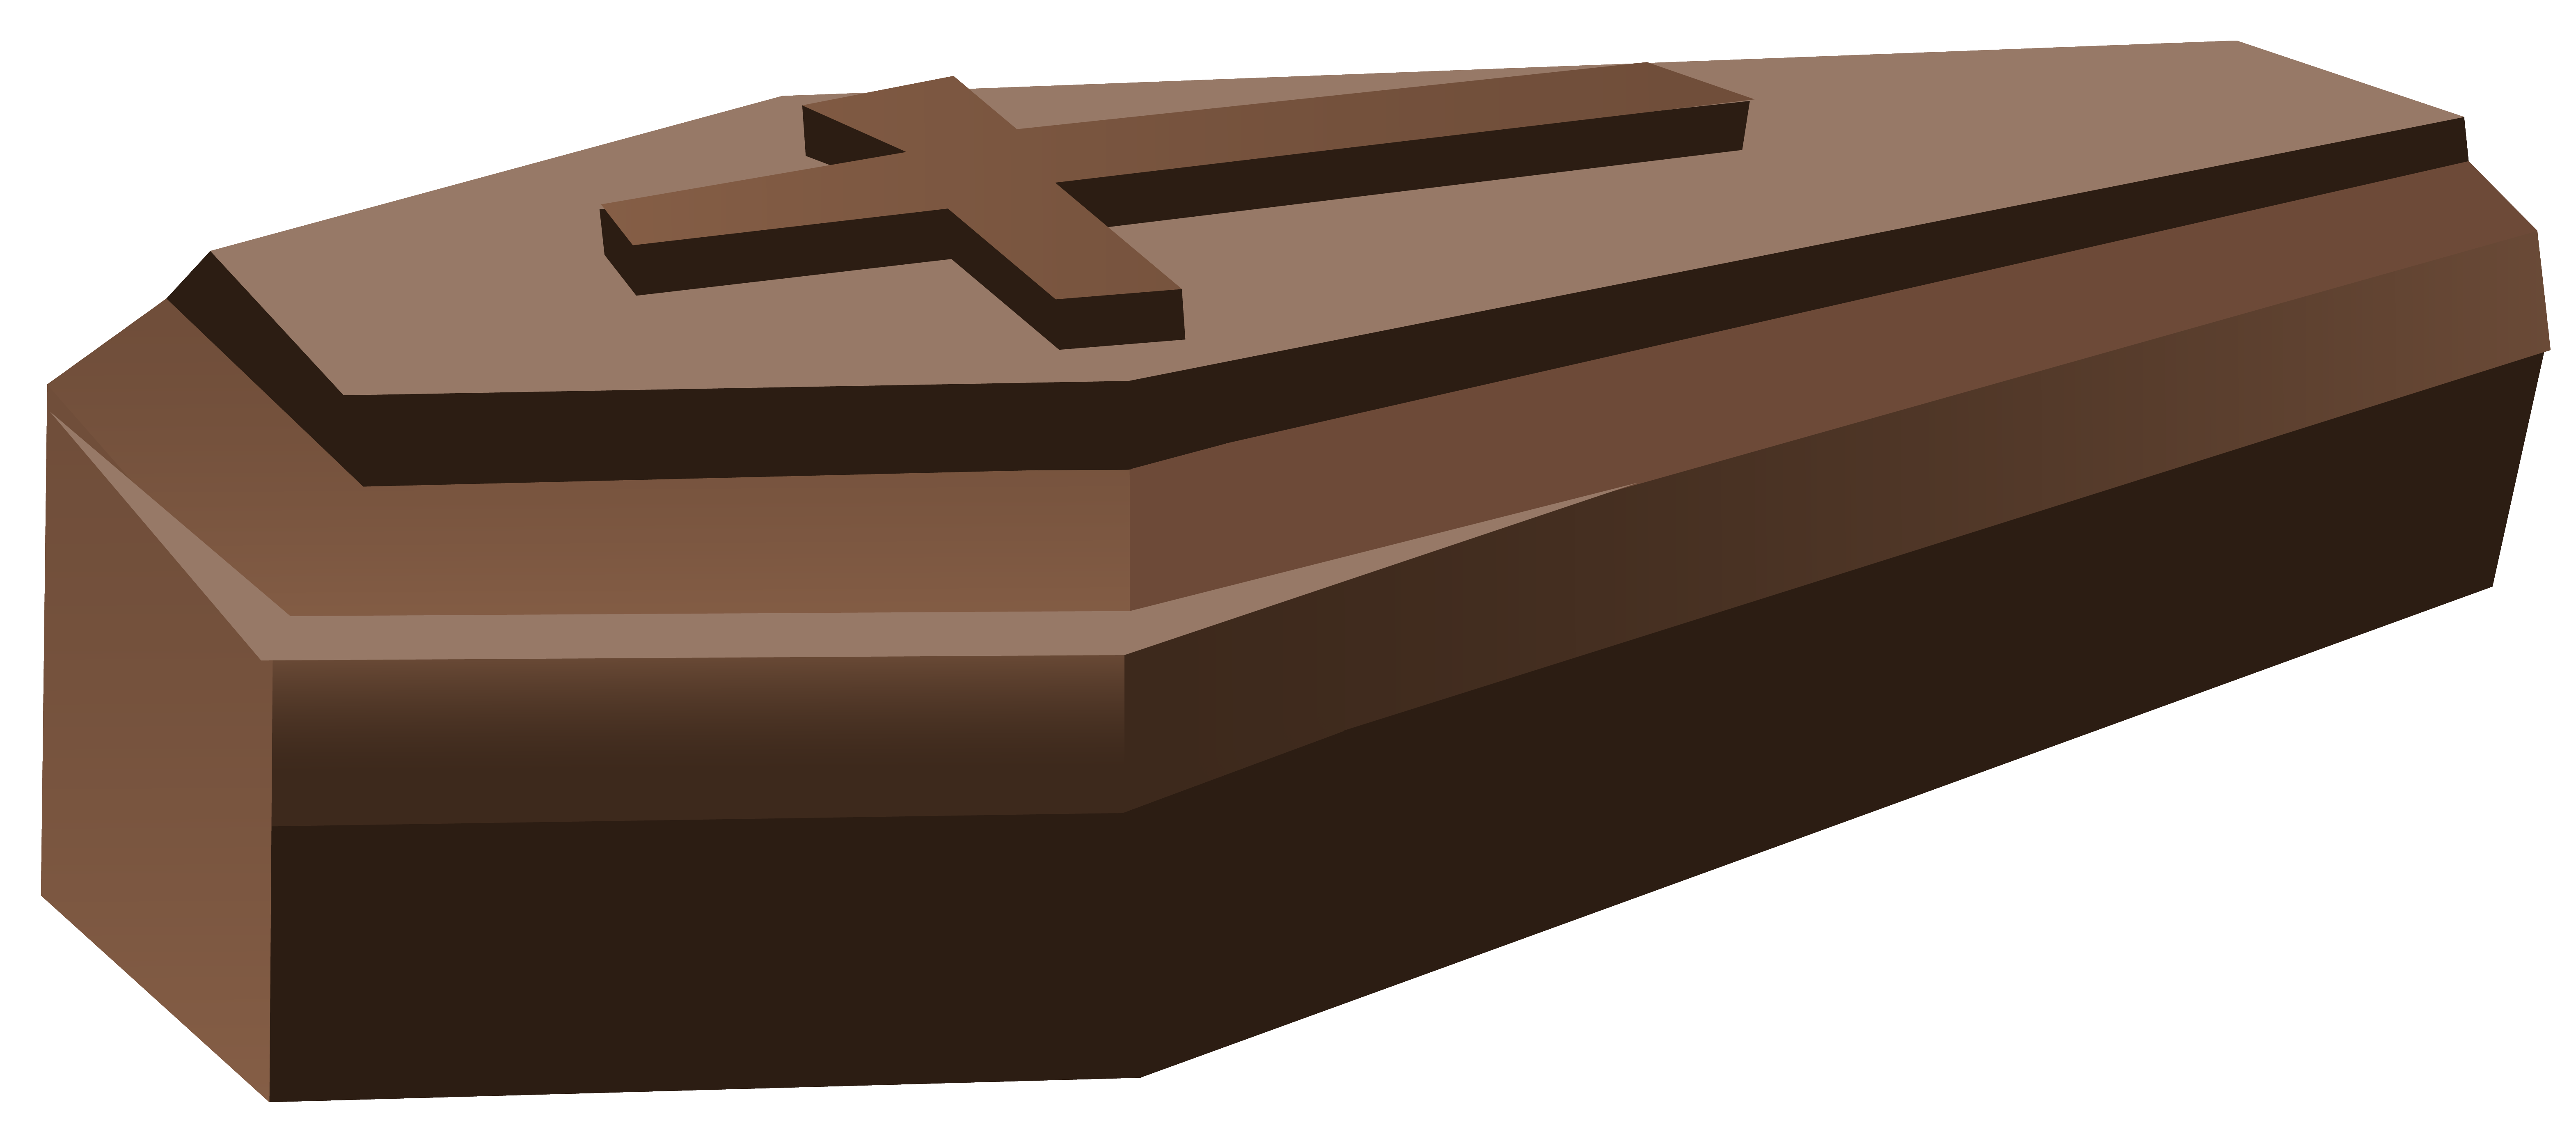 Brown Coffin PNG Clipart Image.